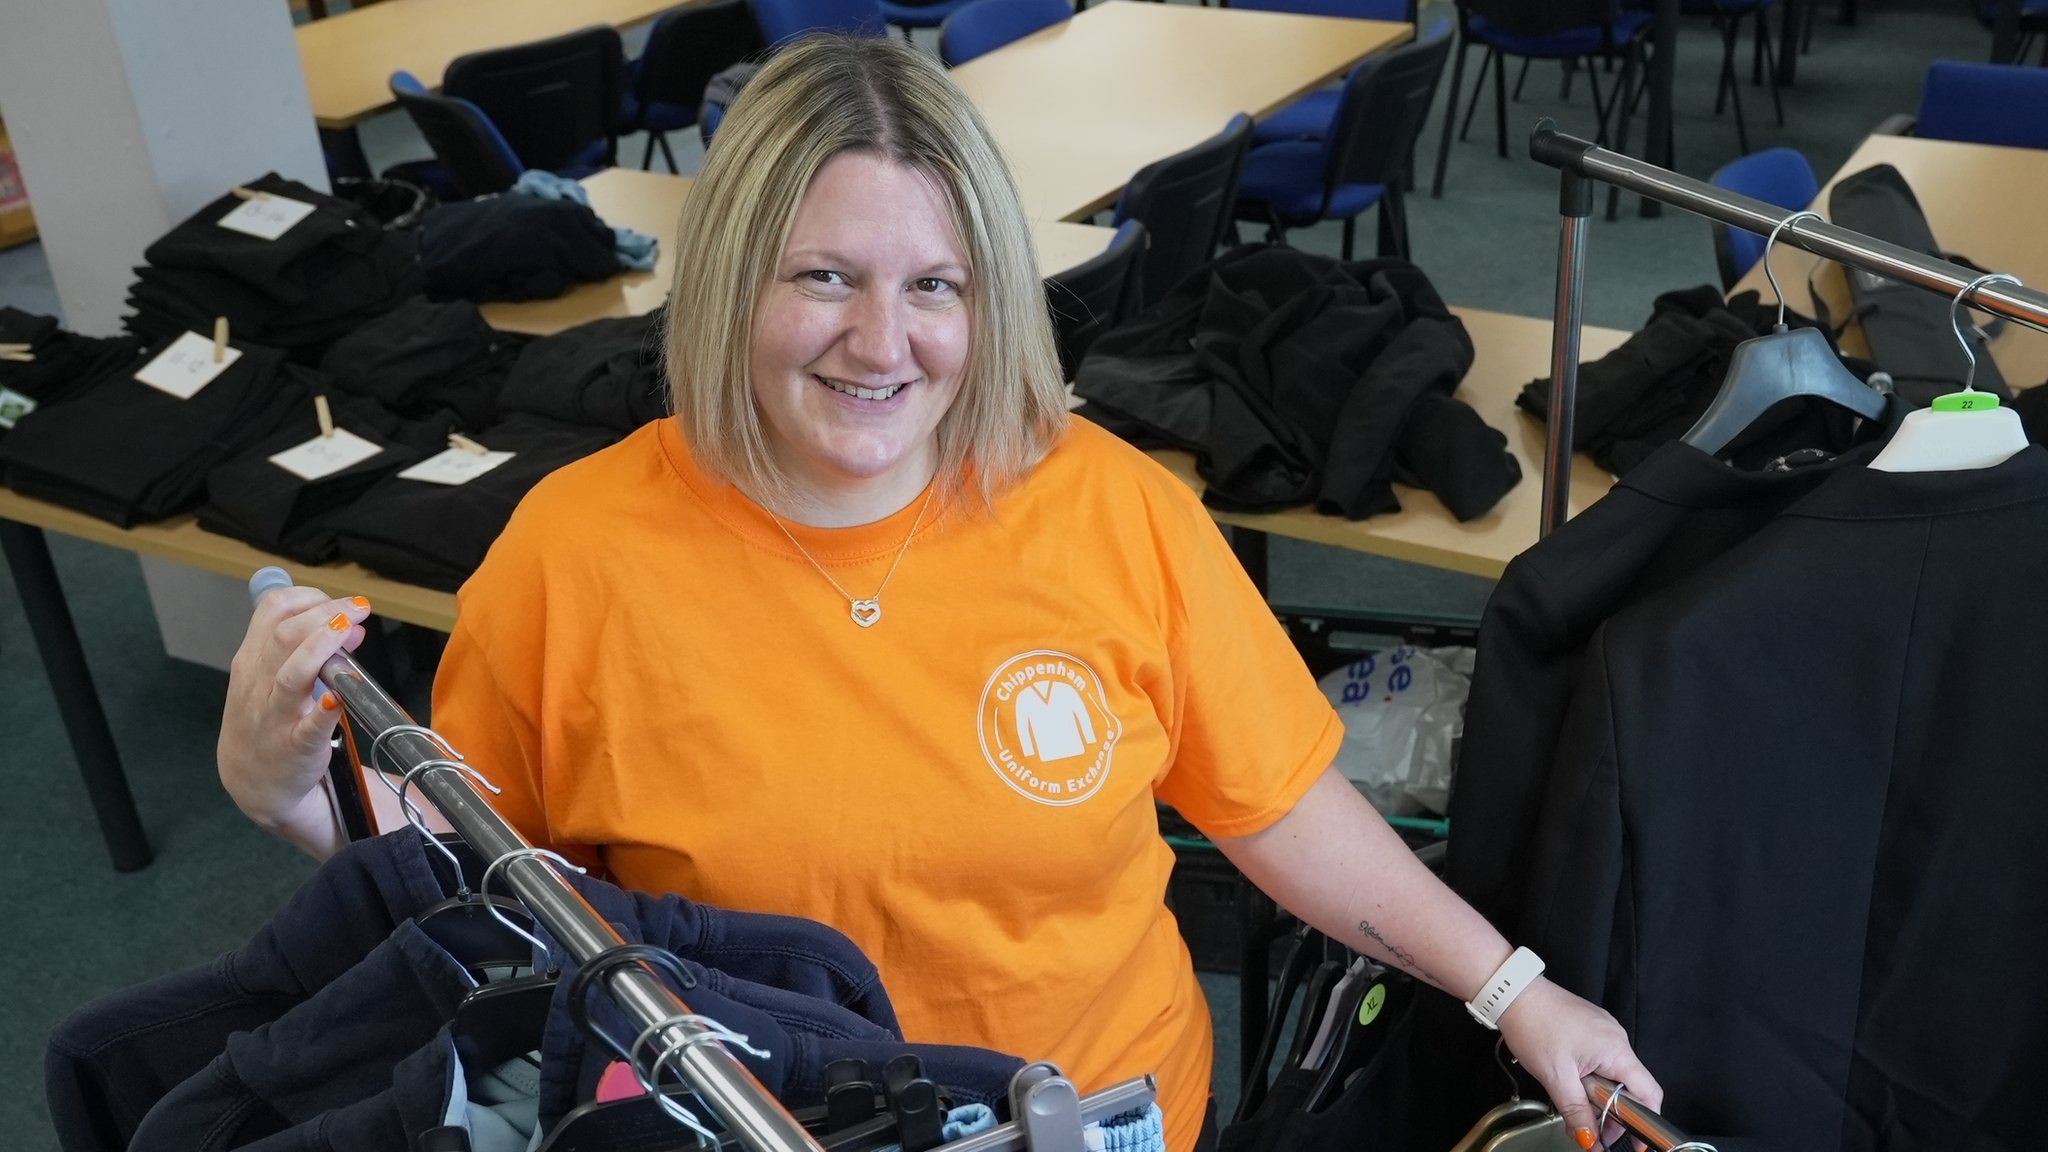 Woman in orange t-shirt looks up at camera surrounded by rails of school uniform.